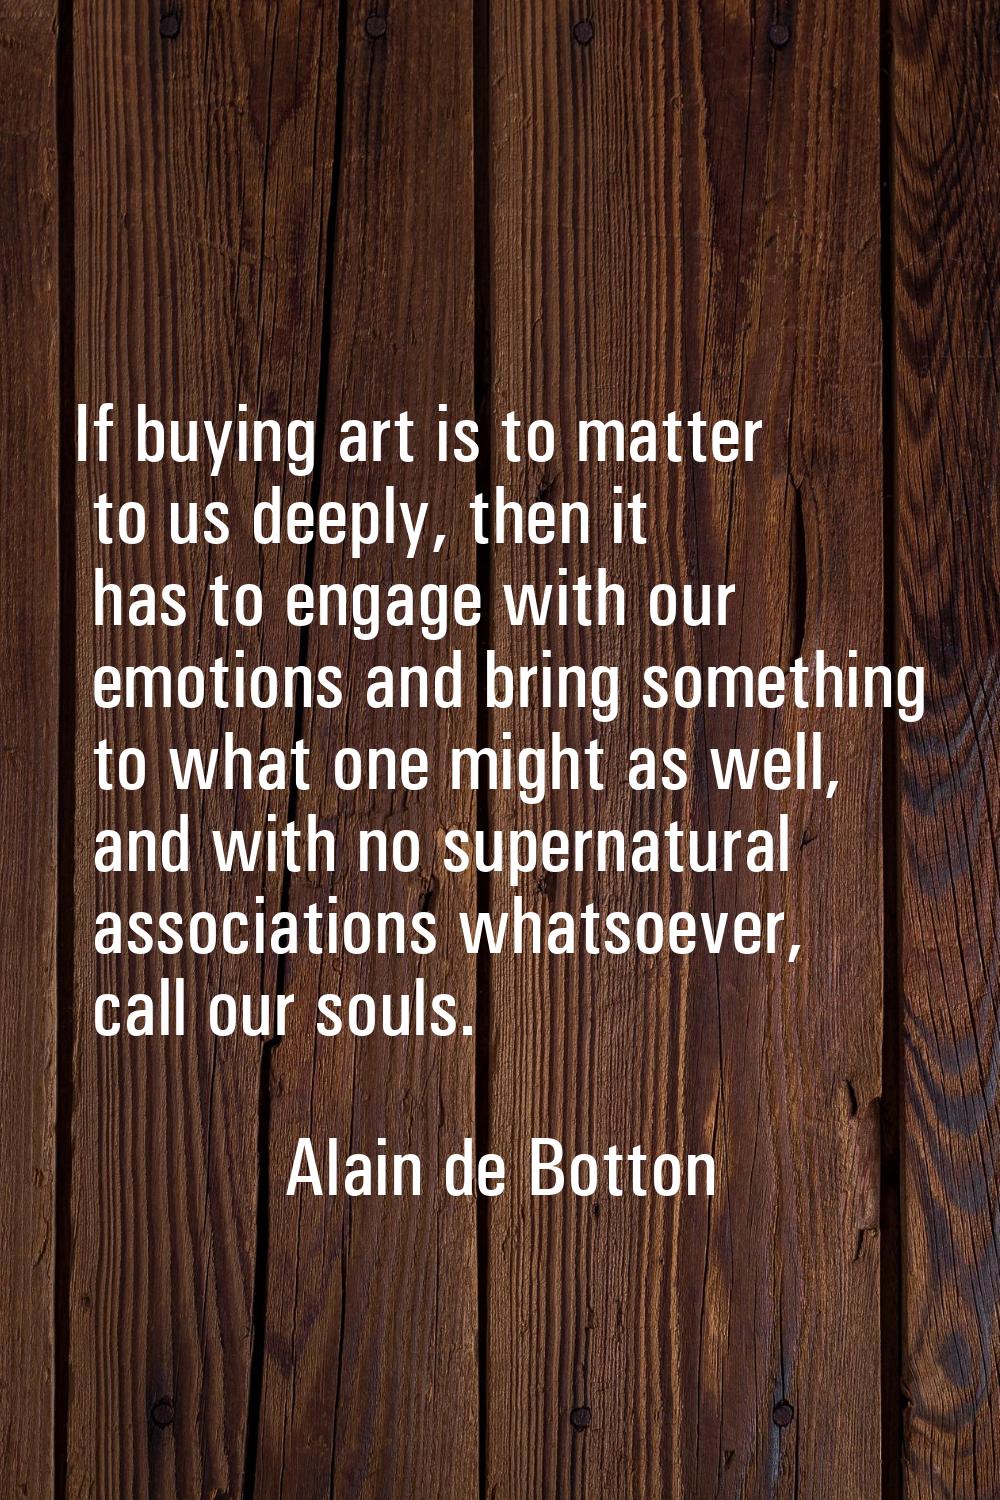 If buying art is to matter to us deeply, then it has to engage with our emotions and bring somethin